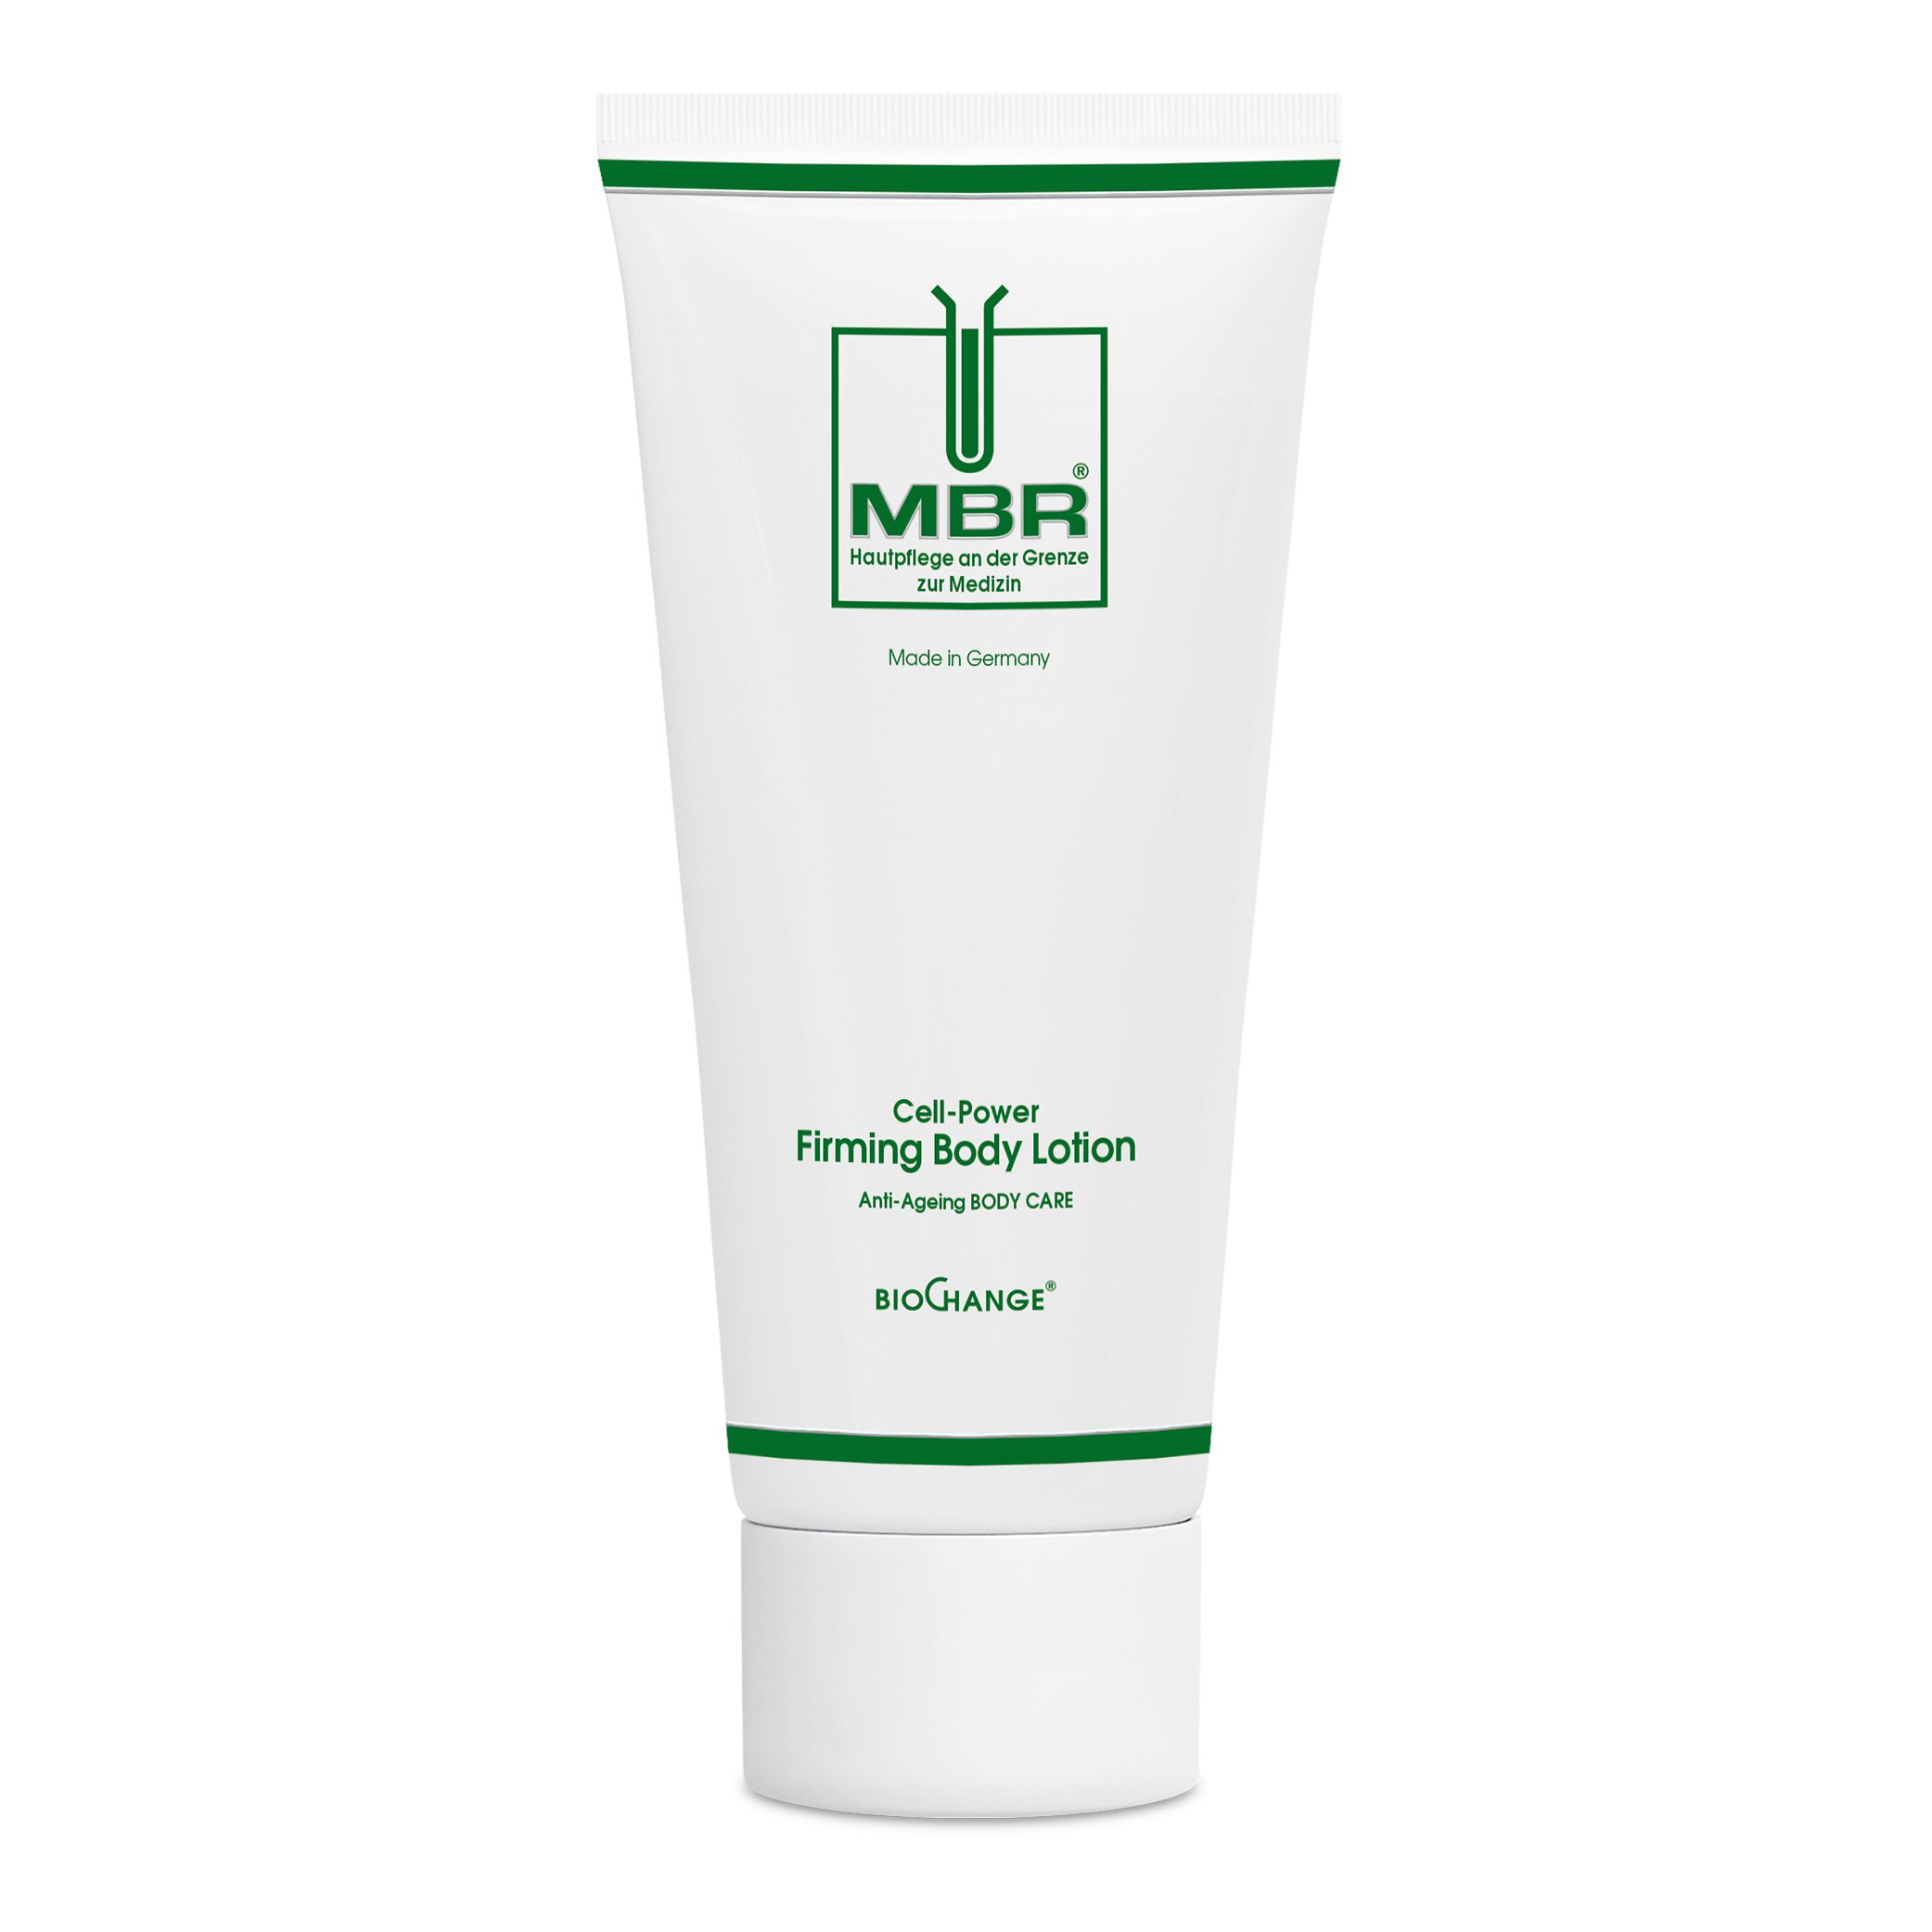 MBR Cell-Power Firming Body Lotion